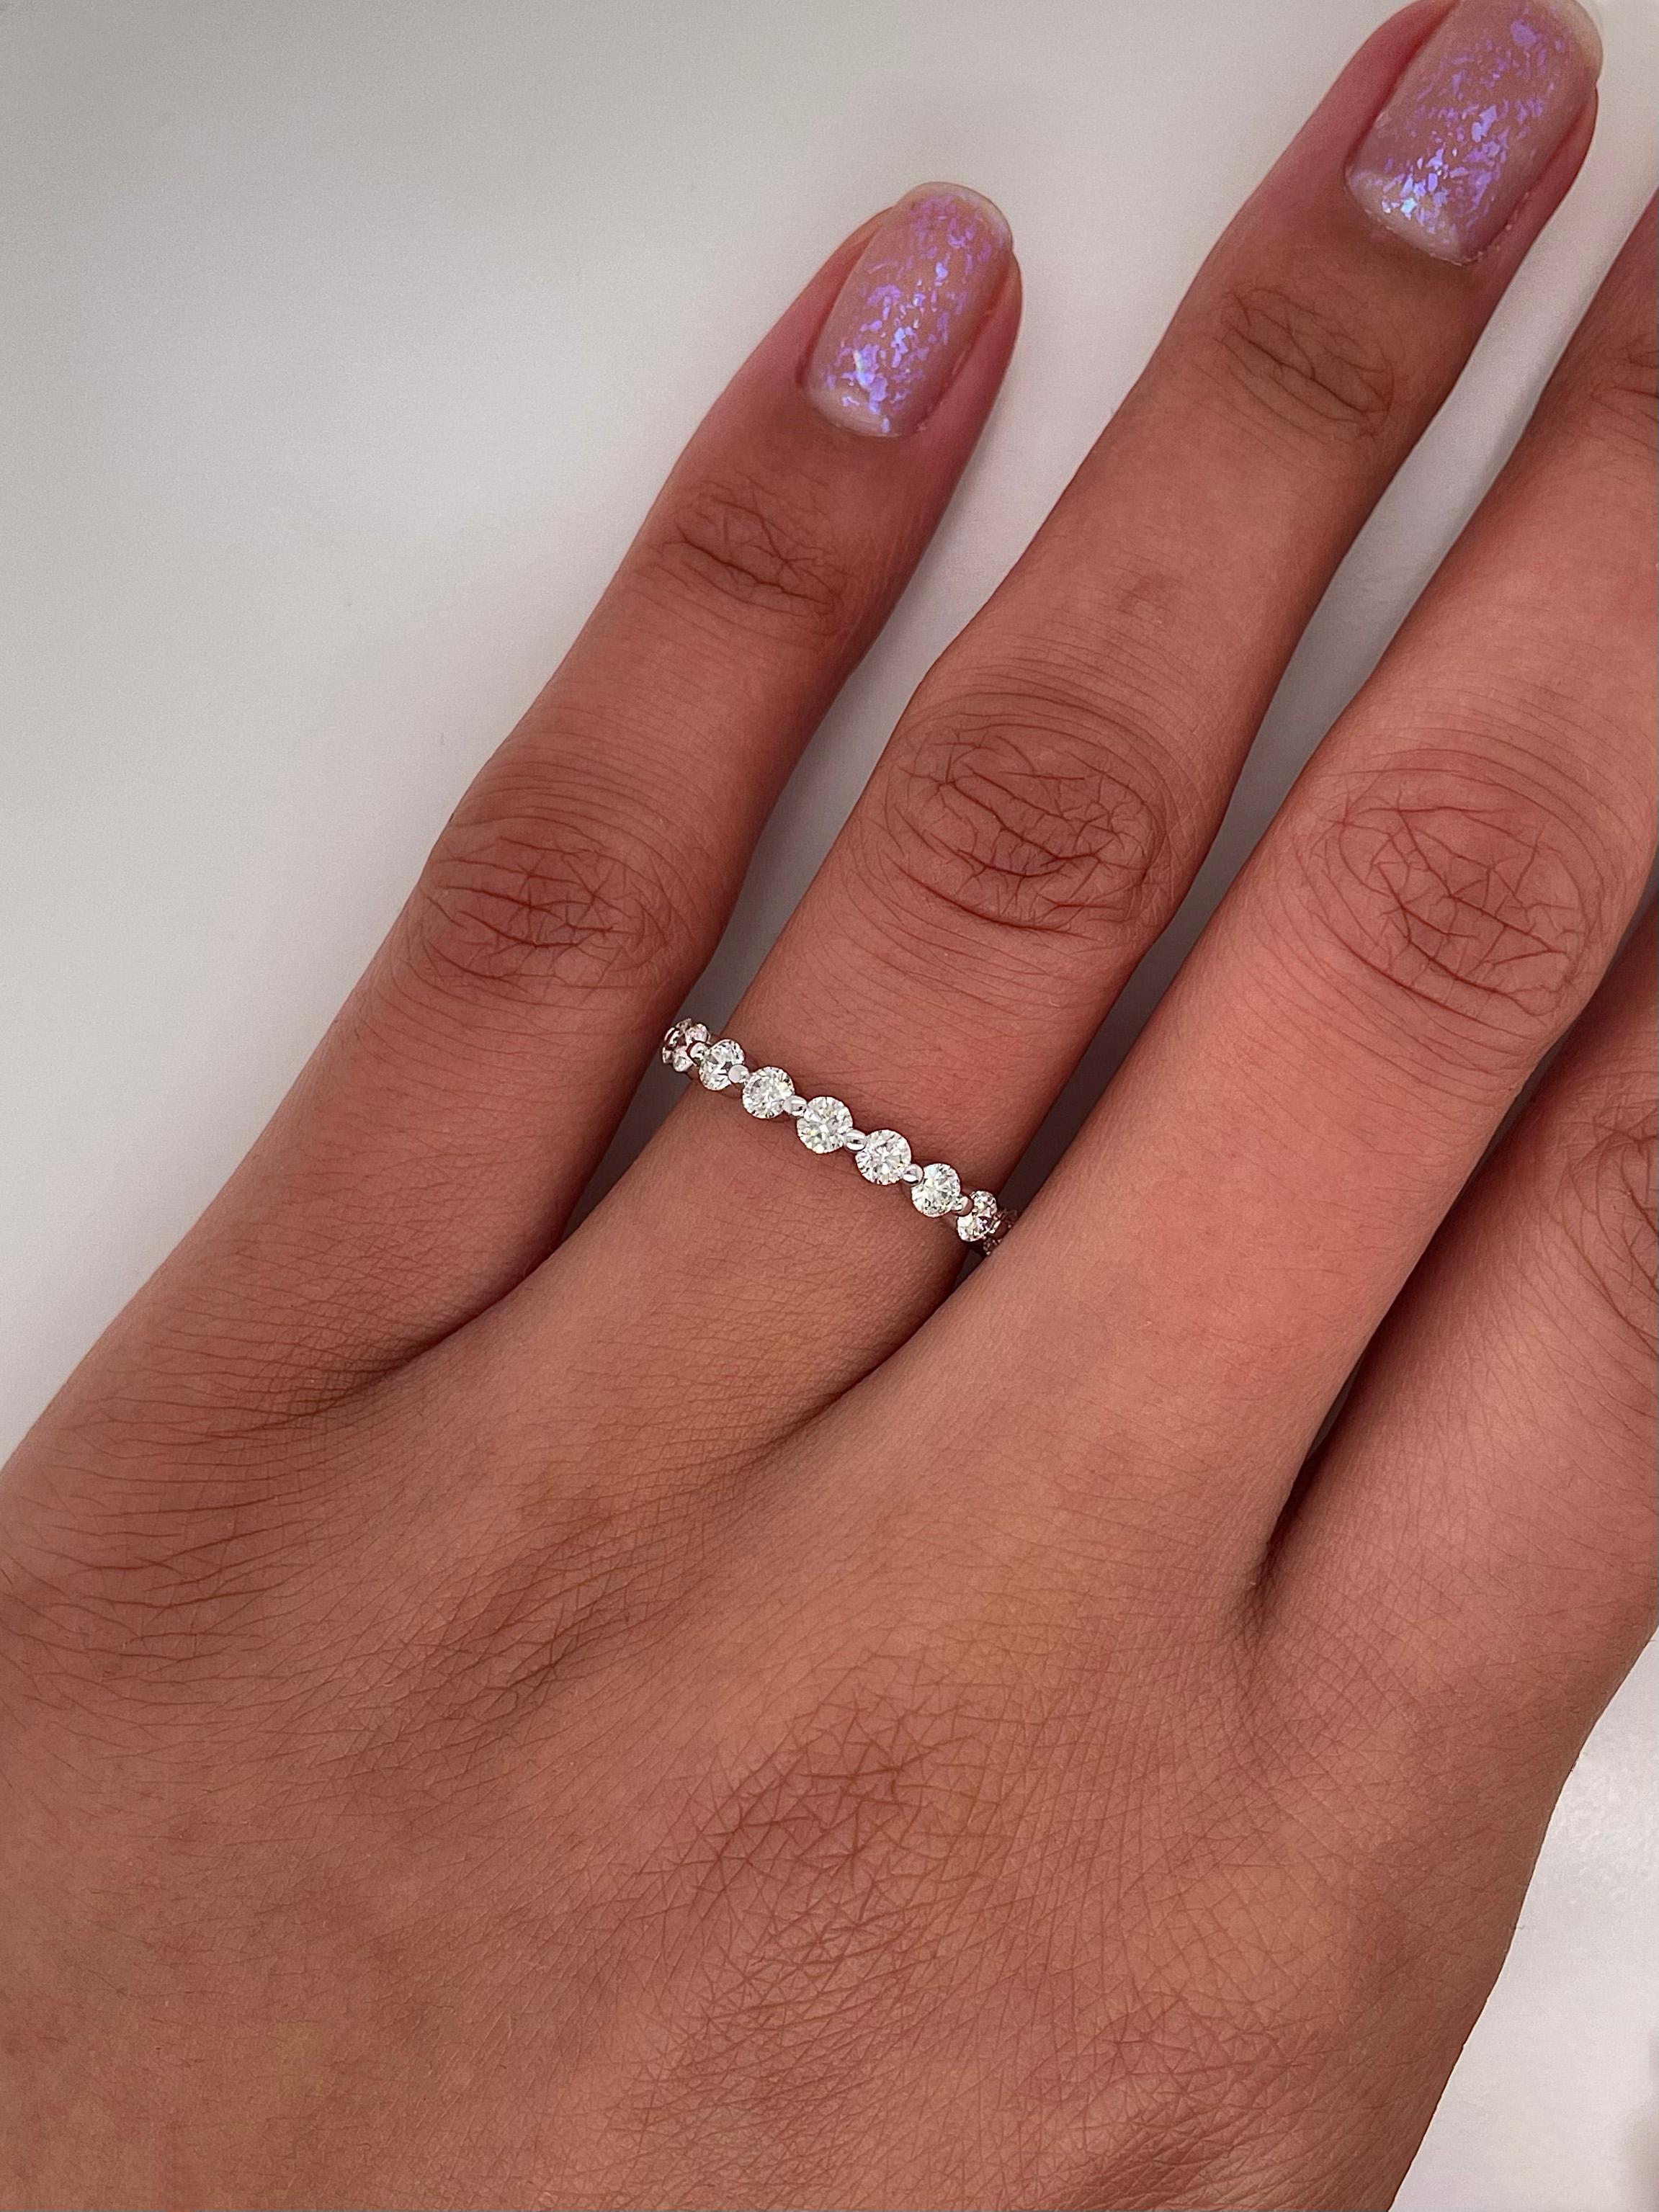 Ladies diamond Eternity band carries 1.29ct of brilliant cut diamonds placed in 14K white gold.

Size: 6.0
Color: G-H
Clarity: SI

This shared prong style Eternity band was handmade by our jewelers in New York City.